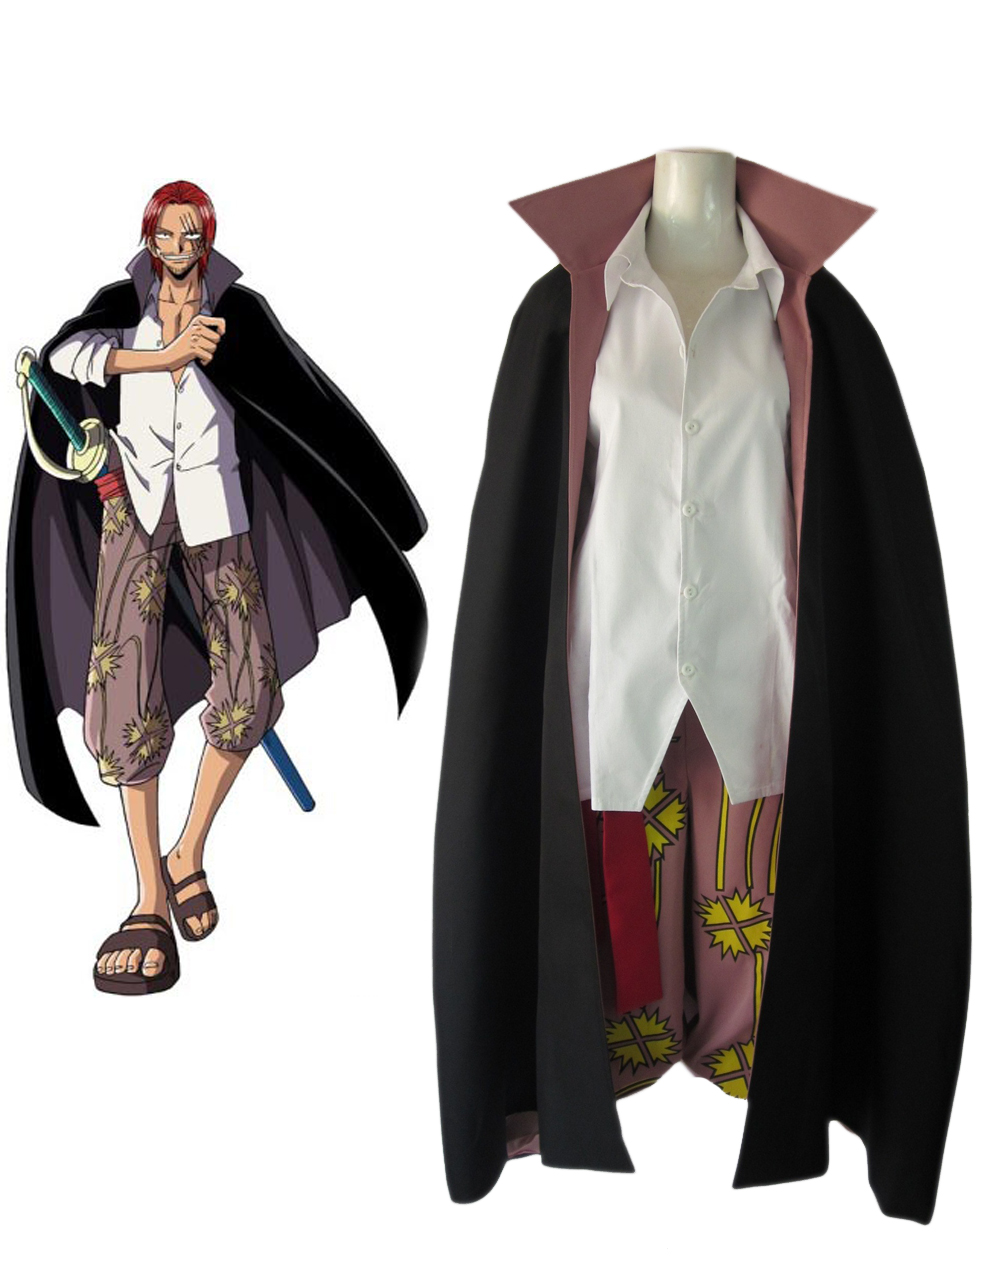 One Piece Red Haired Shanks Two Years Latter Cosplay Costume 022 Op Cos 022 99 Superhero Costumes Online Store Cosplay Zentai Costume Ideas For Party A Popular Superhero Cosplay Costume Online Store